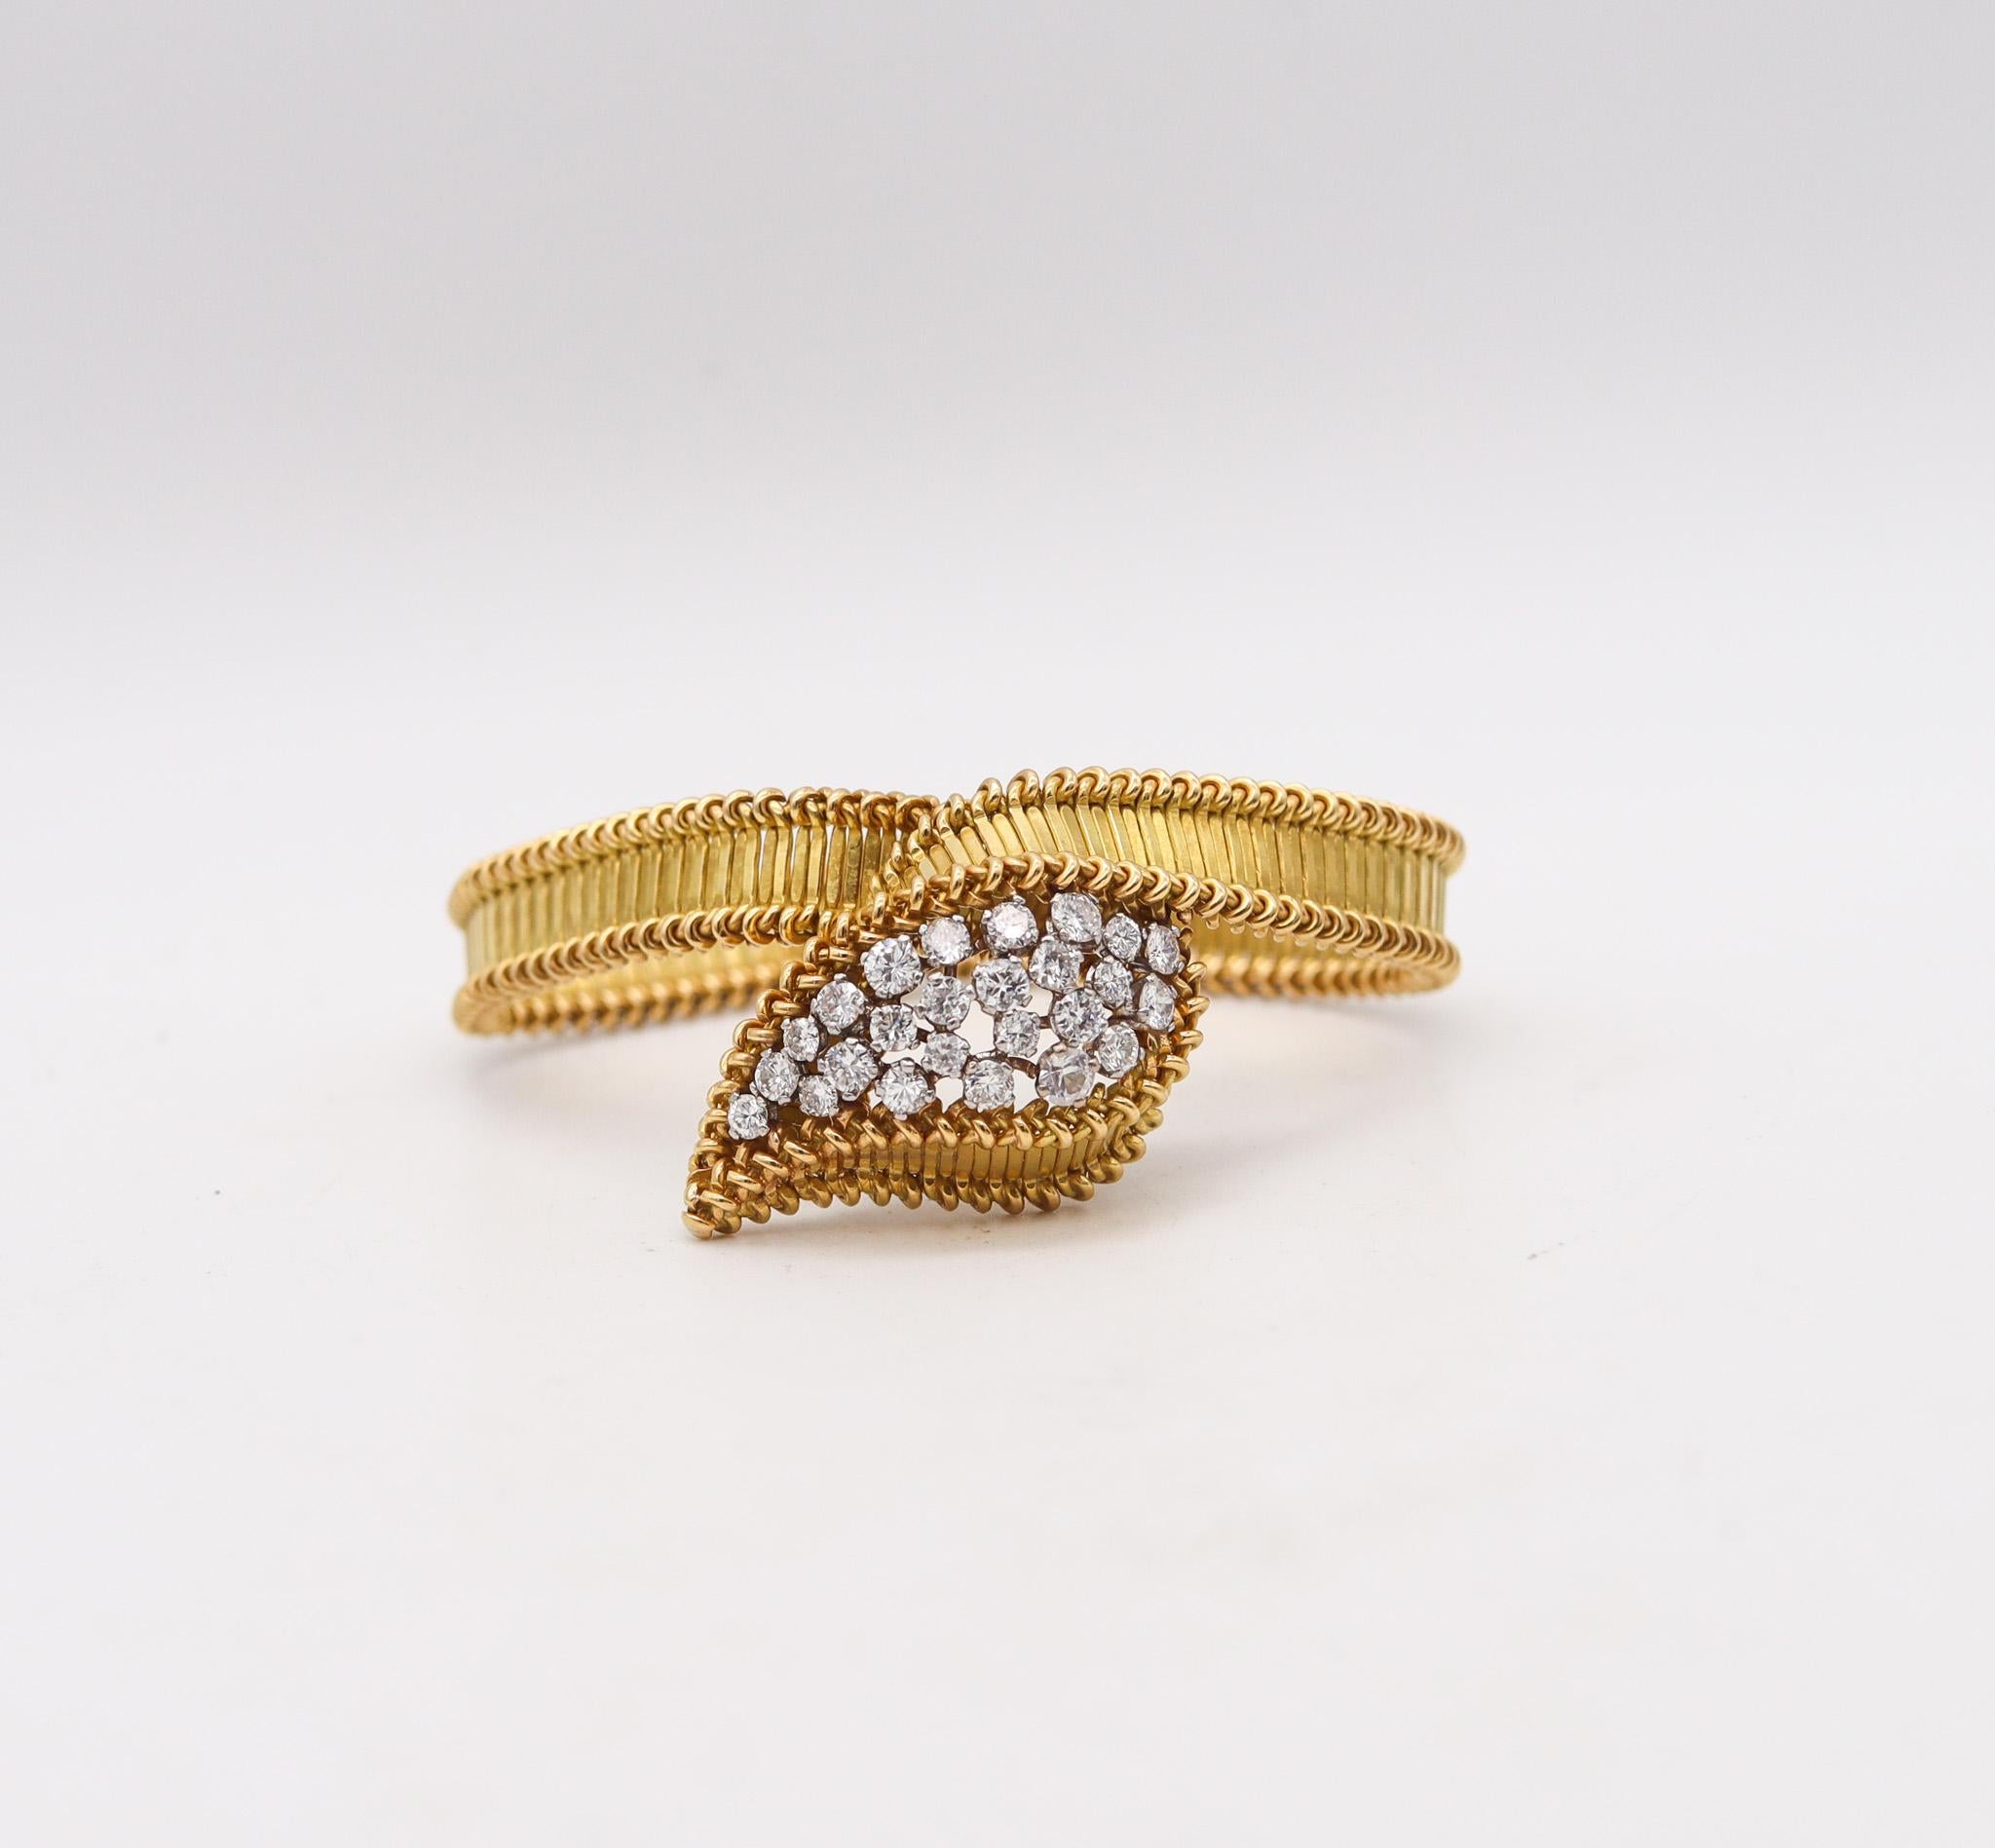 Retro modernist bracelet designed by Boucheron.

Fabulous flexible bracelet created by the iconic French jewelry house of Boucheron. This statement and unusual bracelet was made in Paris at the atelier of Andre Vassort, during the post-war period,